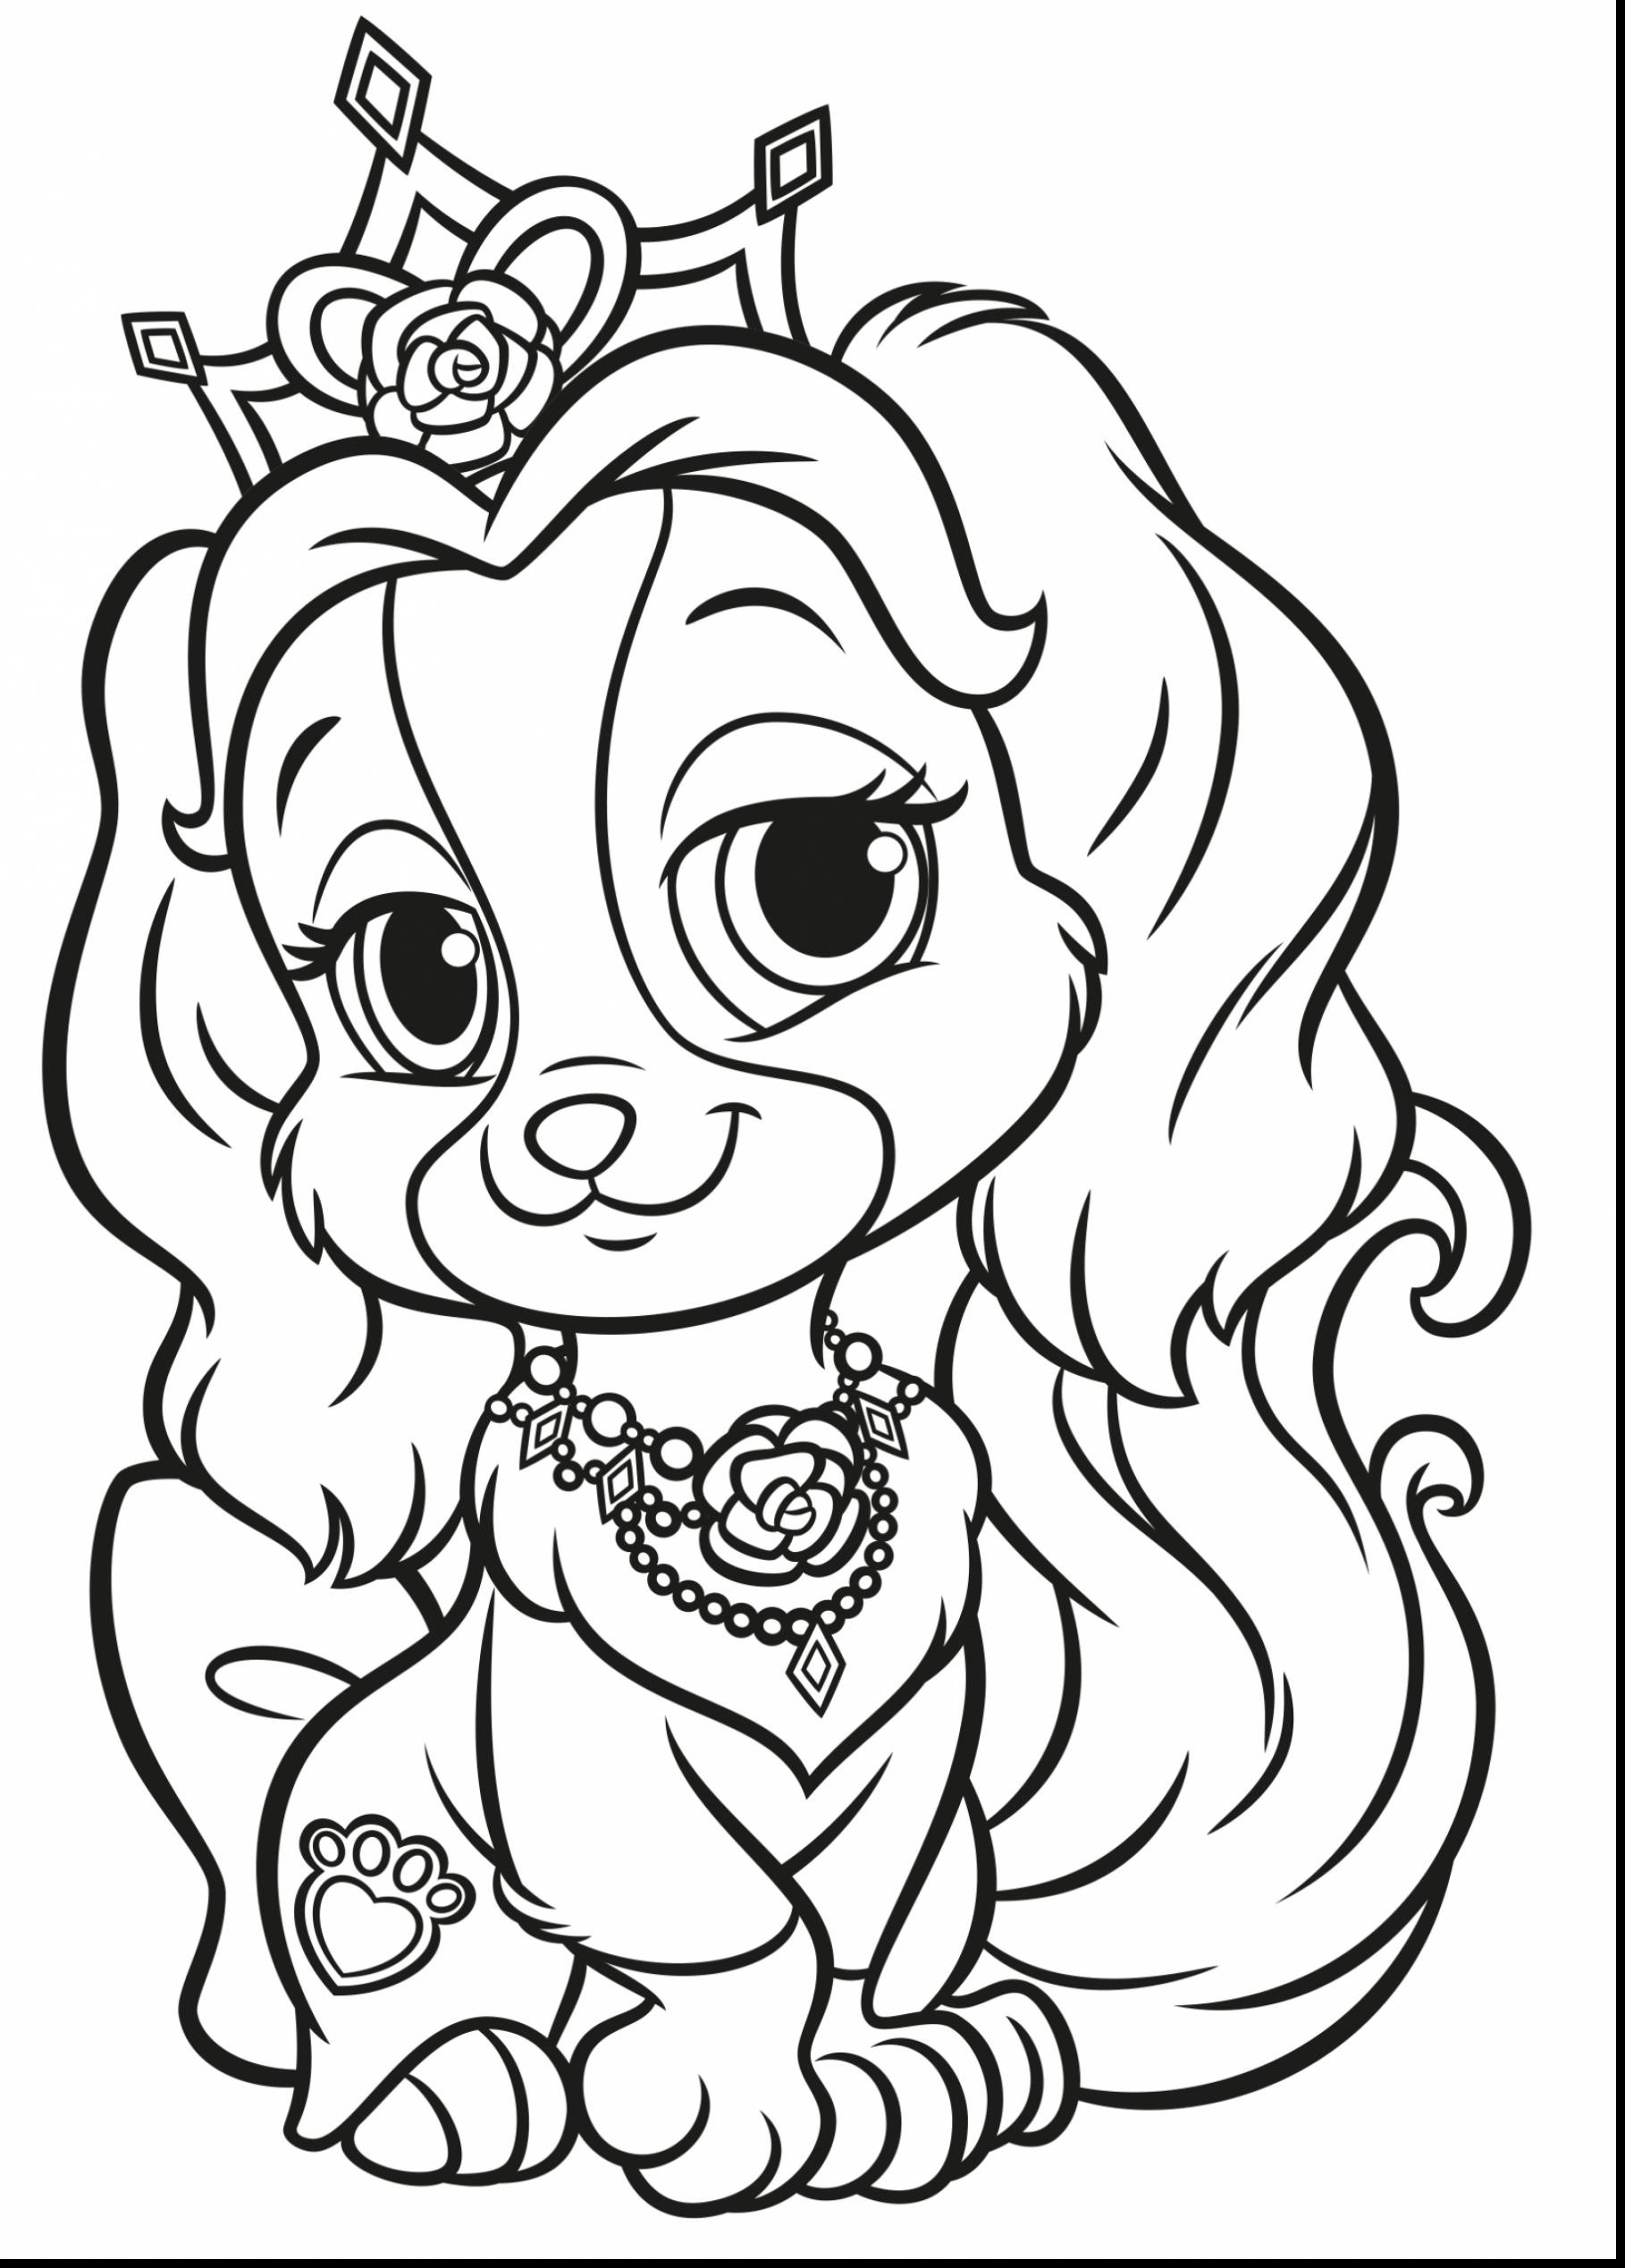 Little Puppy Coloring Pages Images Of Free Printable Puppy Coloring Pages Sabadaphnecottage